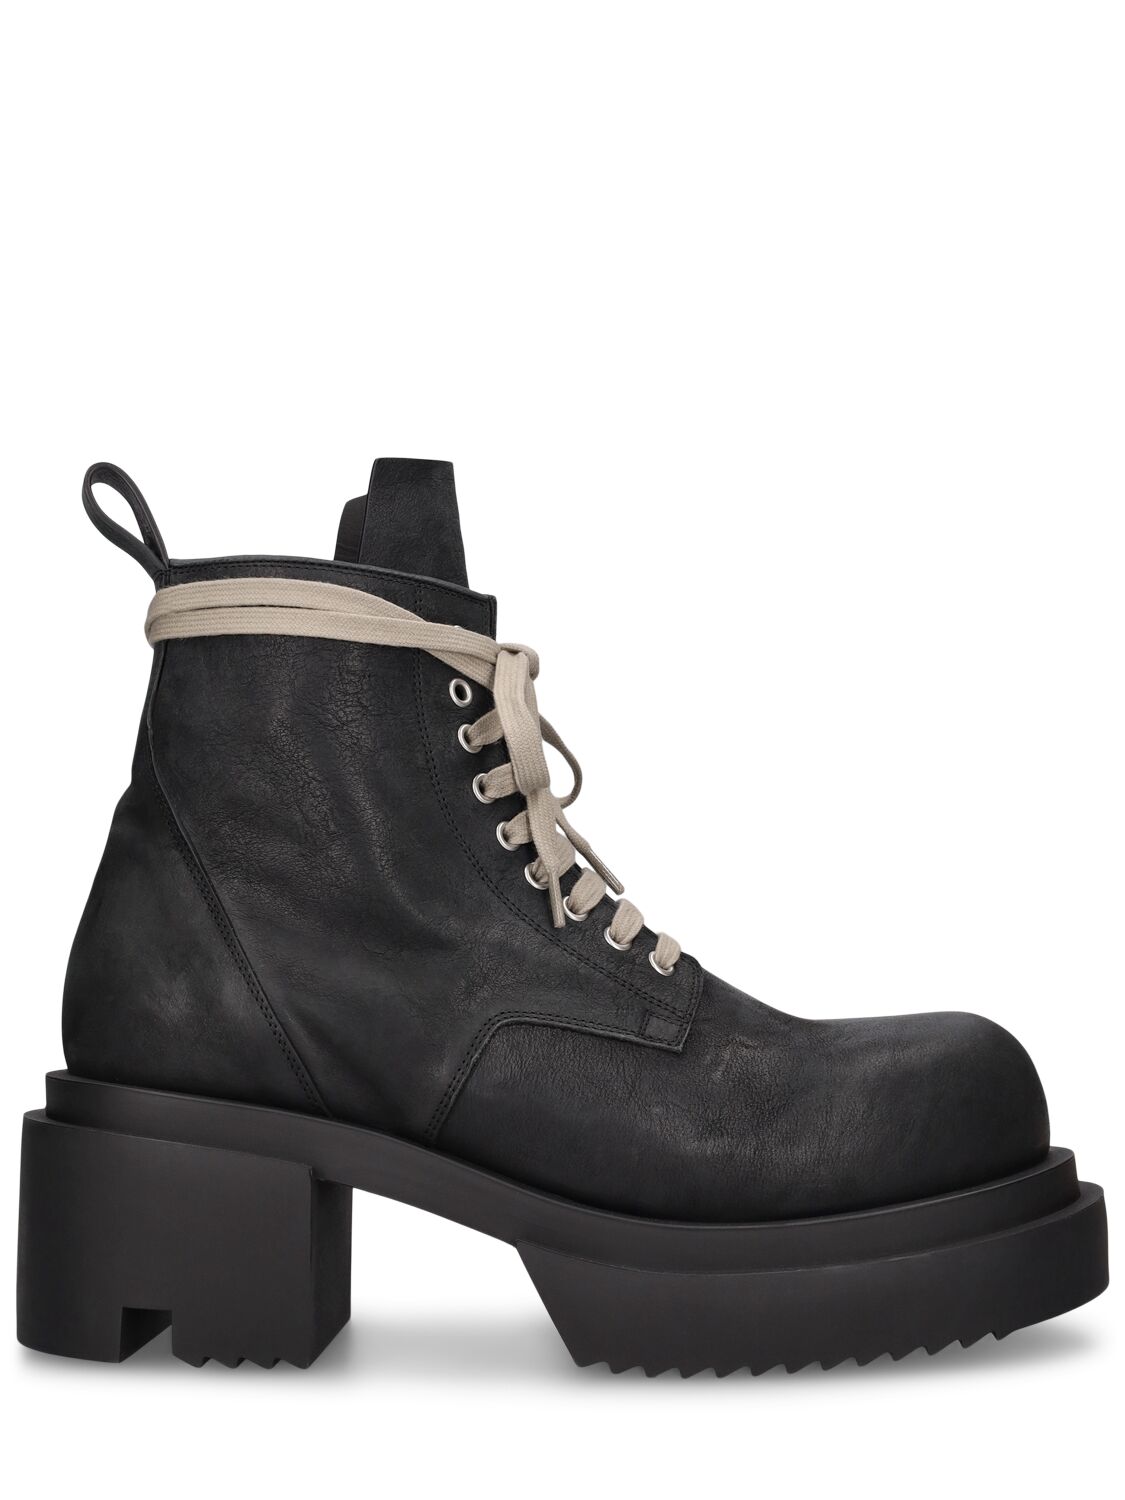 RICK OWENS LOW ARMY BOGUN LEATHER BOOTS